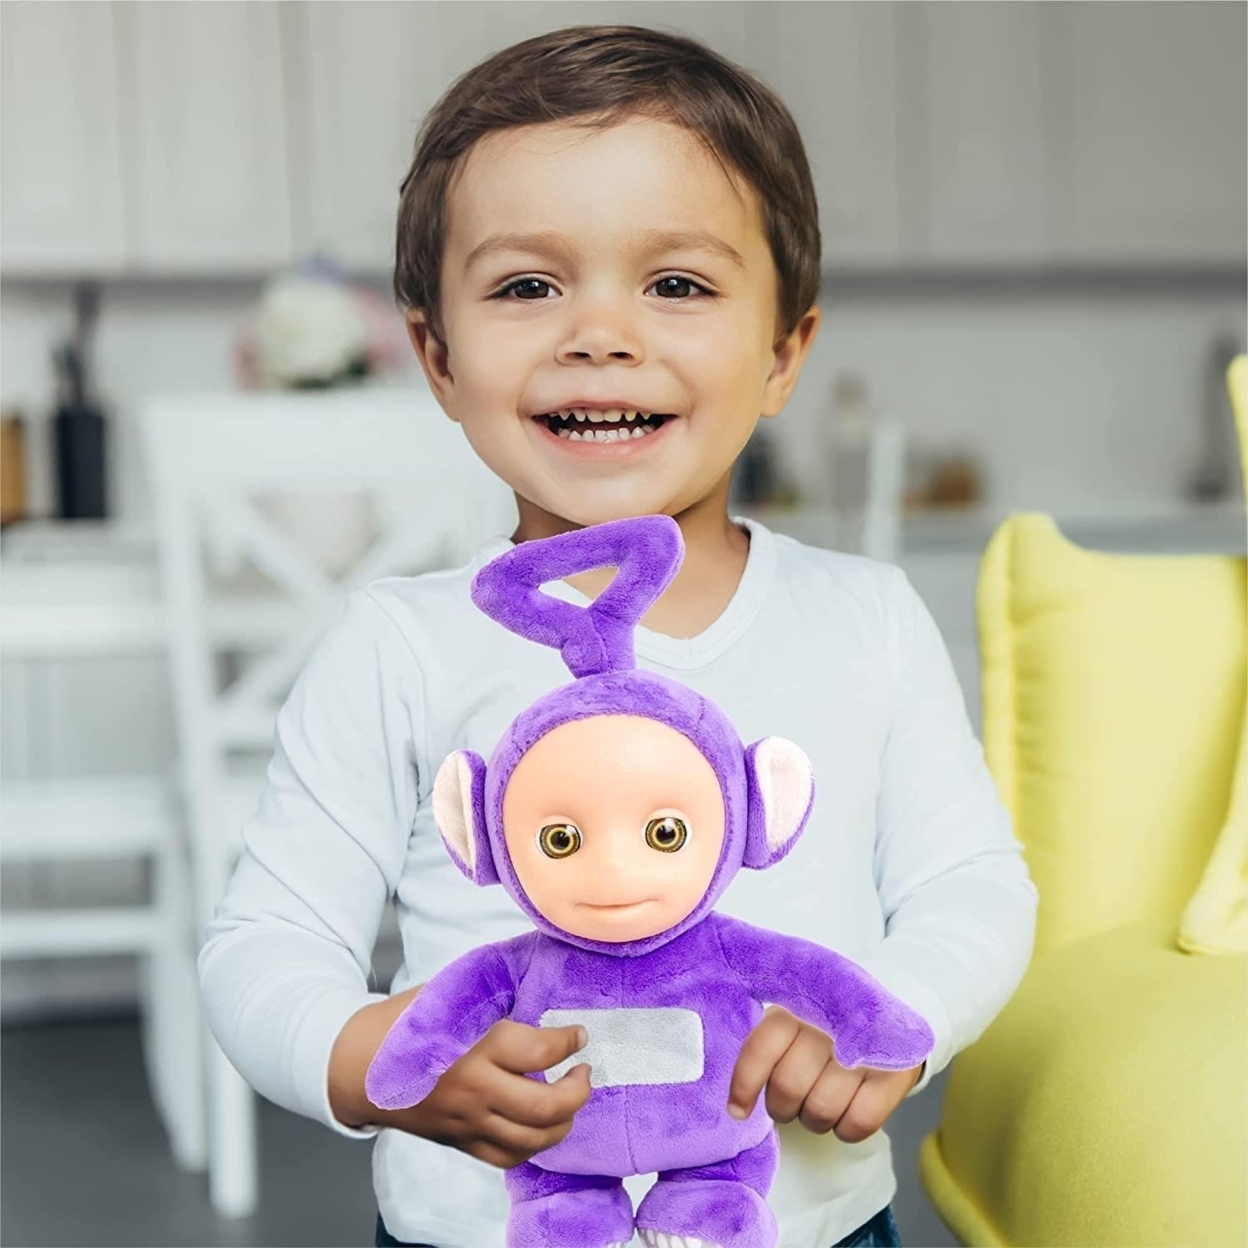 Teletubbies Talking Tinky Winky Purple Plush 11" Doll Giggles Teletubby Toy Mighty Mojo - image 4 of 6